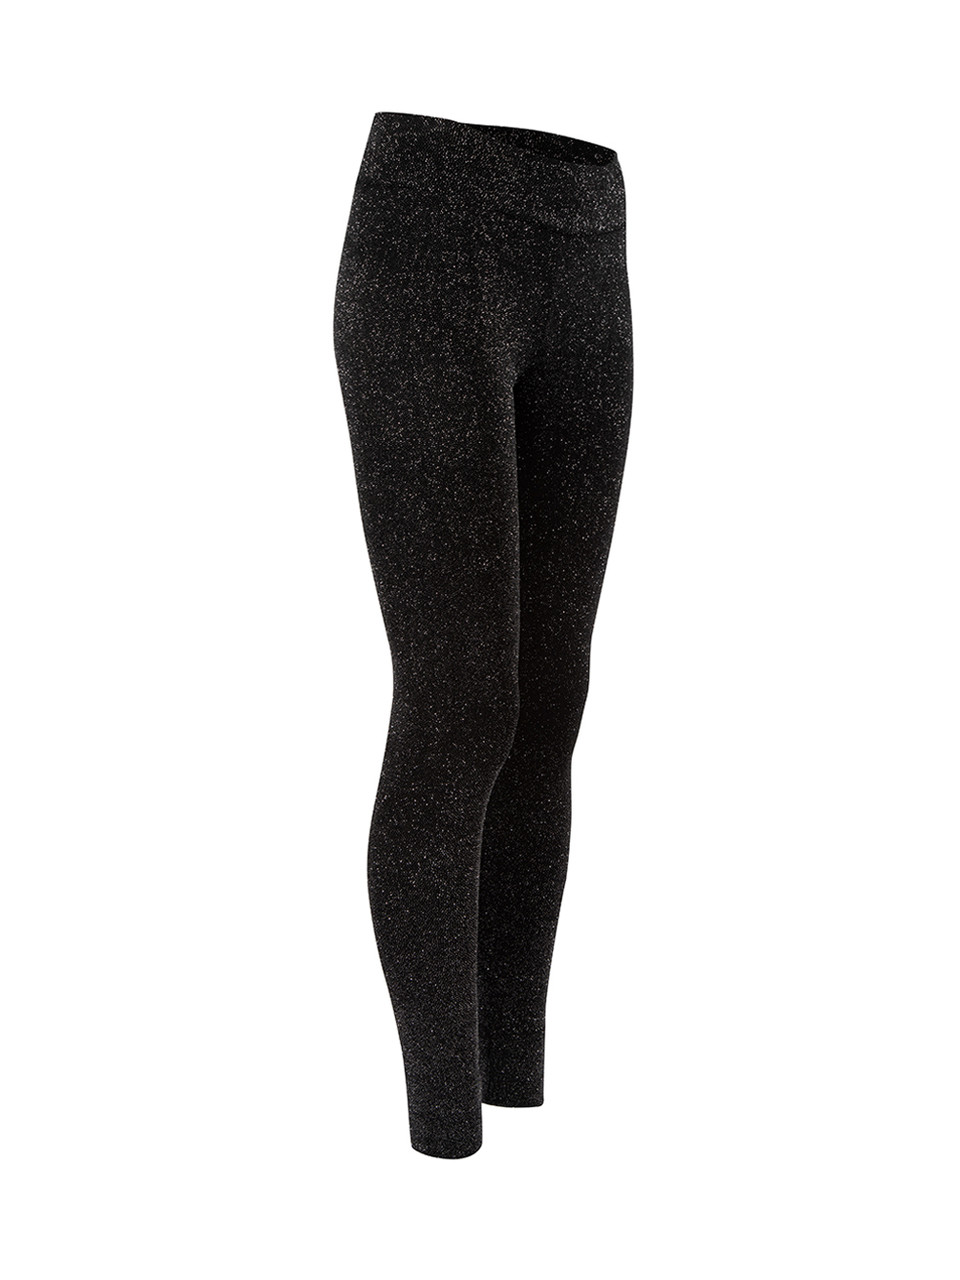 Vivienne Westwood Anglomania Black Glittery High Waisted Leggings